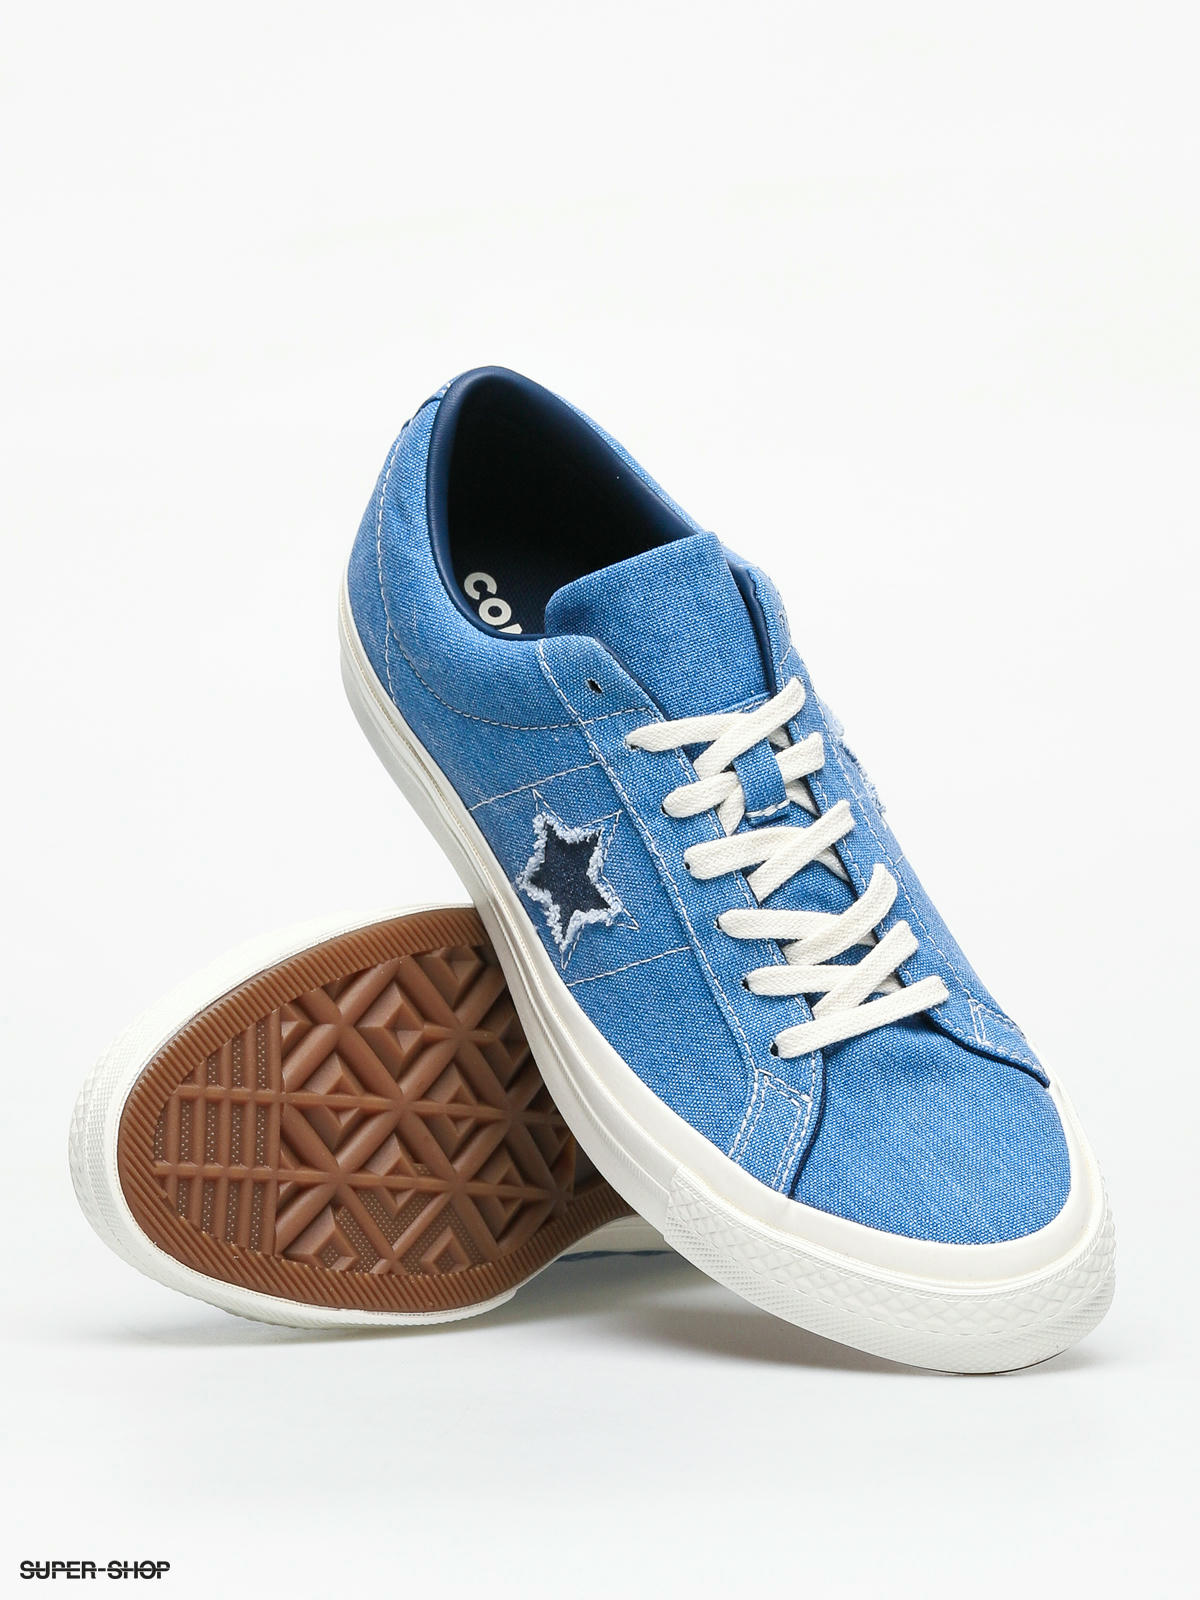 Converse One Star Ox Shoes (totally 